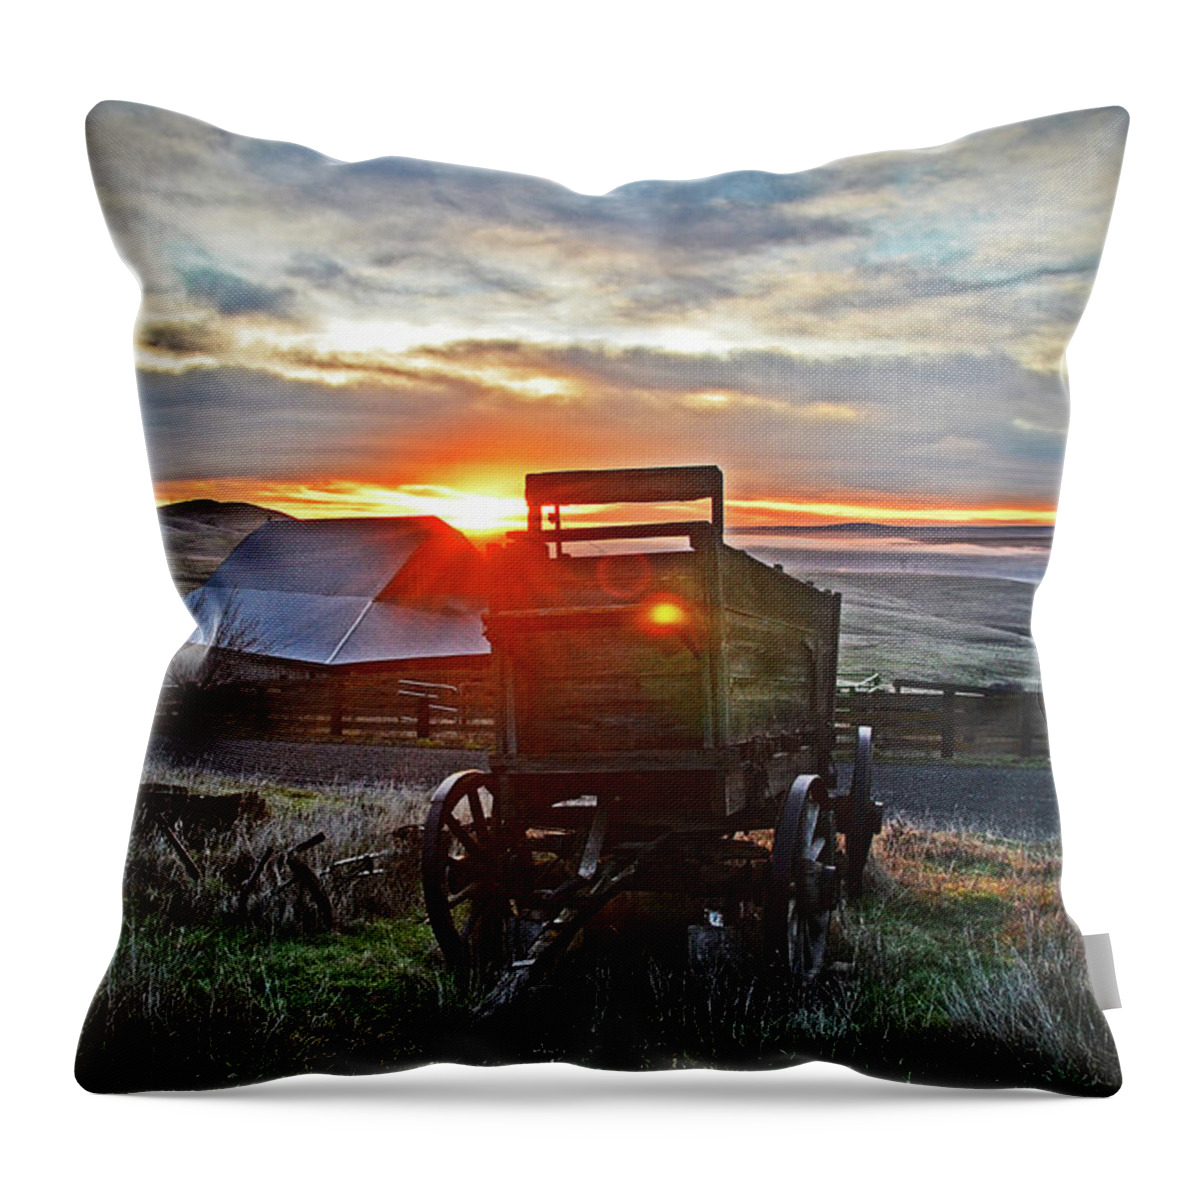  Throw Pillow featuring the digital art Sun rising On Dallas Mountain Ranch  by Fred Loring